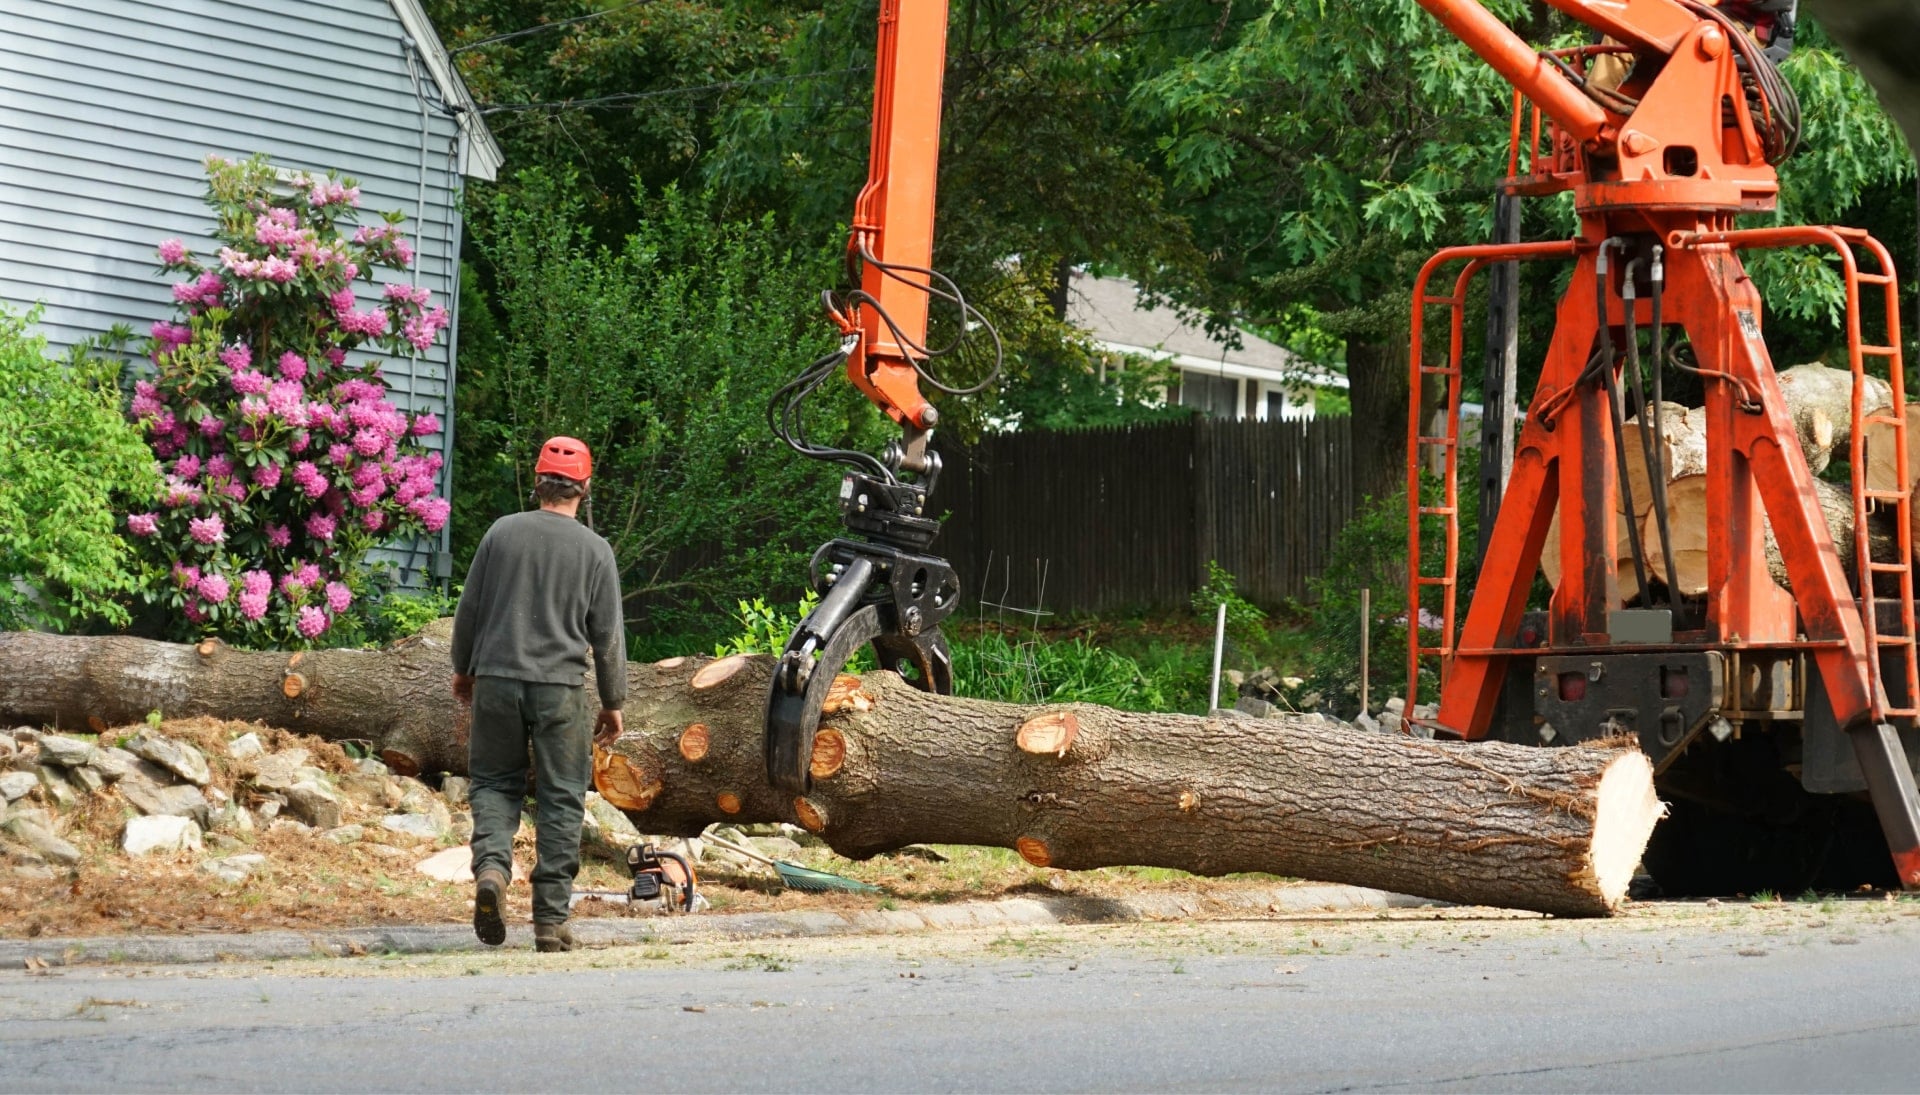 Local partner for Tree removal services in Utica